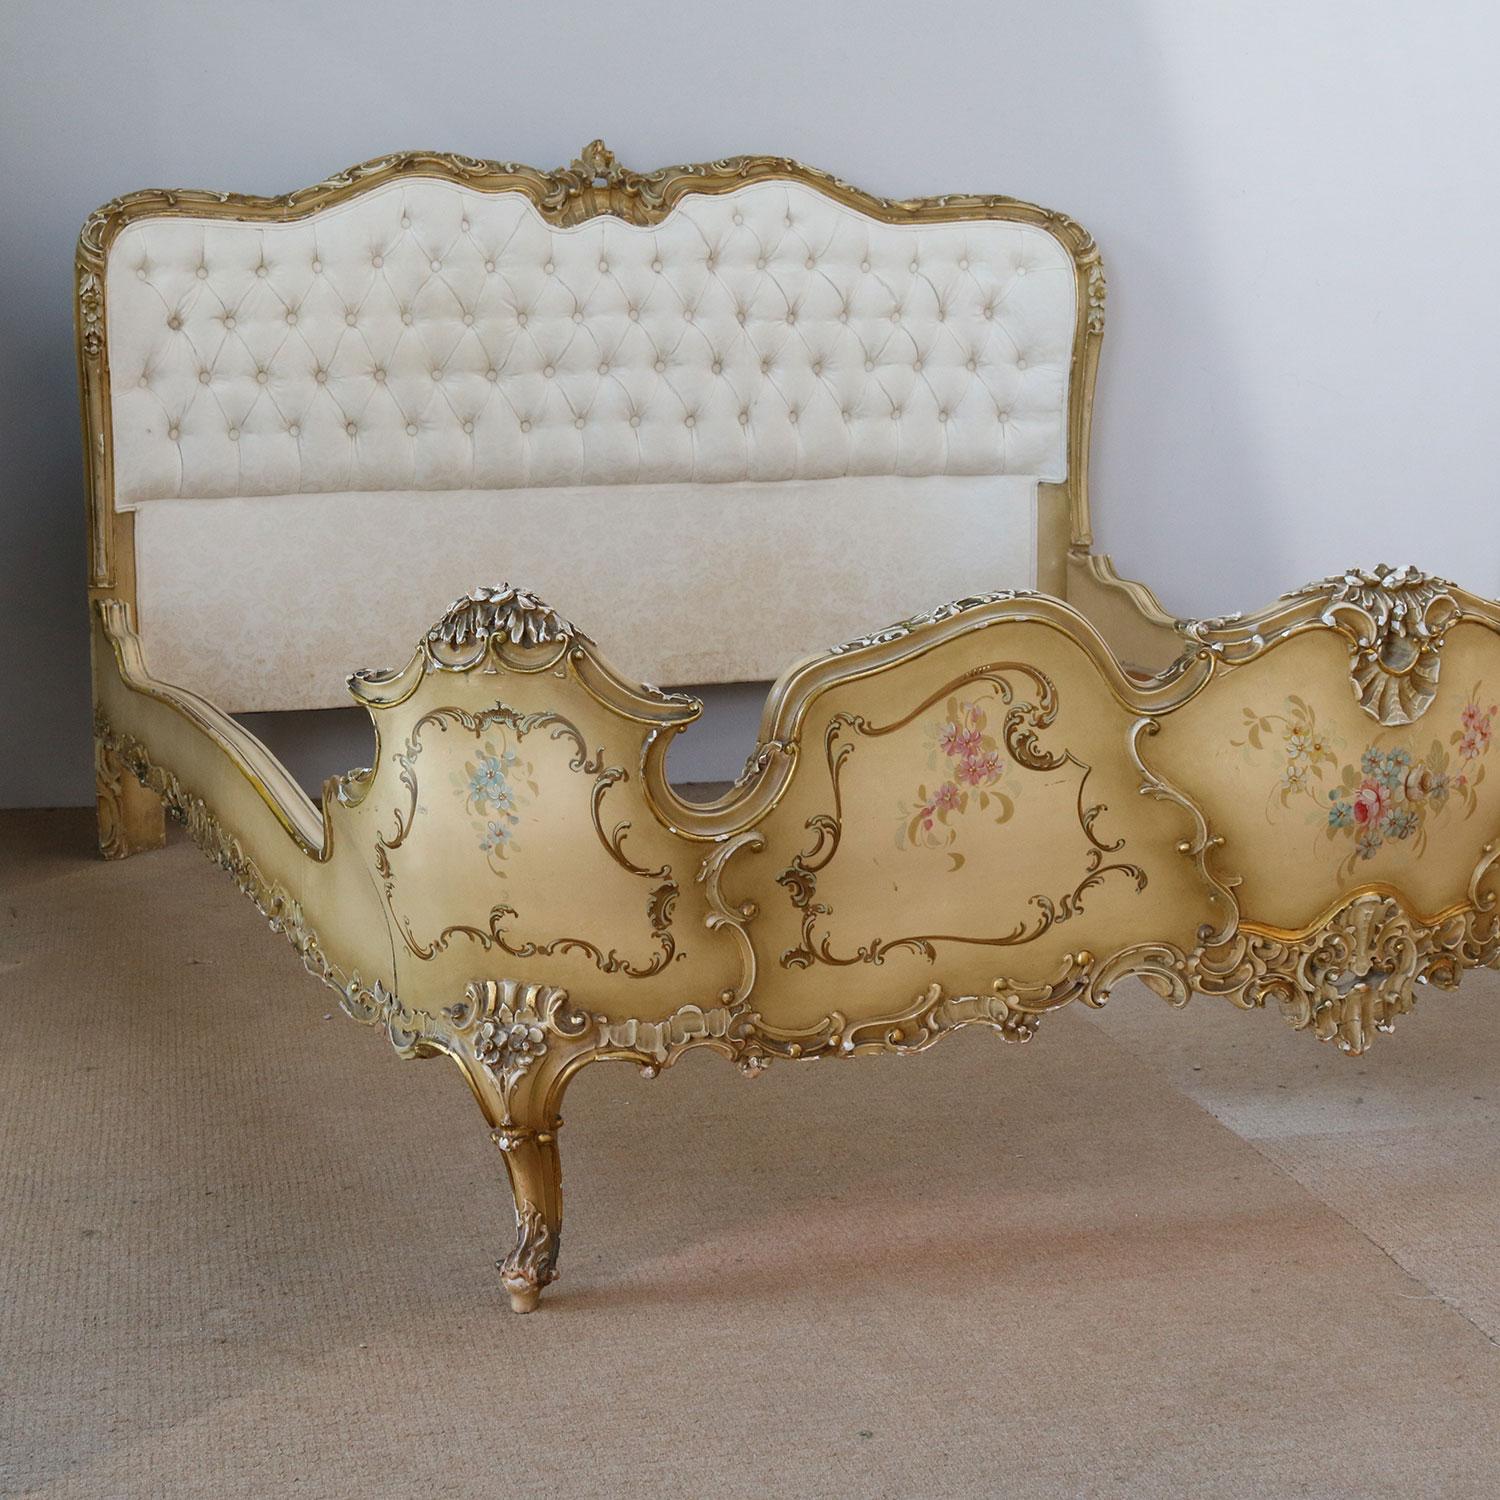 A magnificent Italian bed with a curved button-backed upholstered head panel and low shaped foot board. The frame work is gilded and painted with floral motifs.

This bed accepts an extra wide and shaped base and mattress set (approximately 67